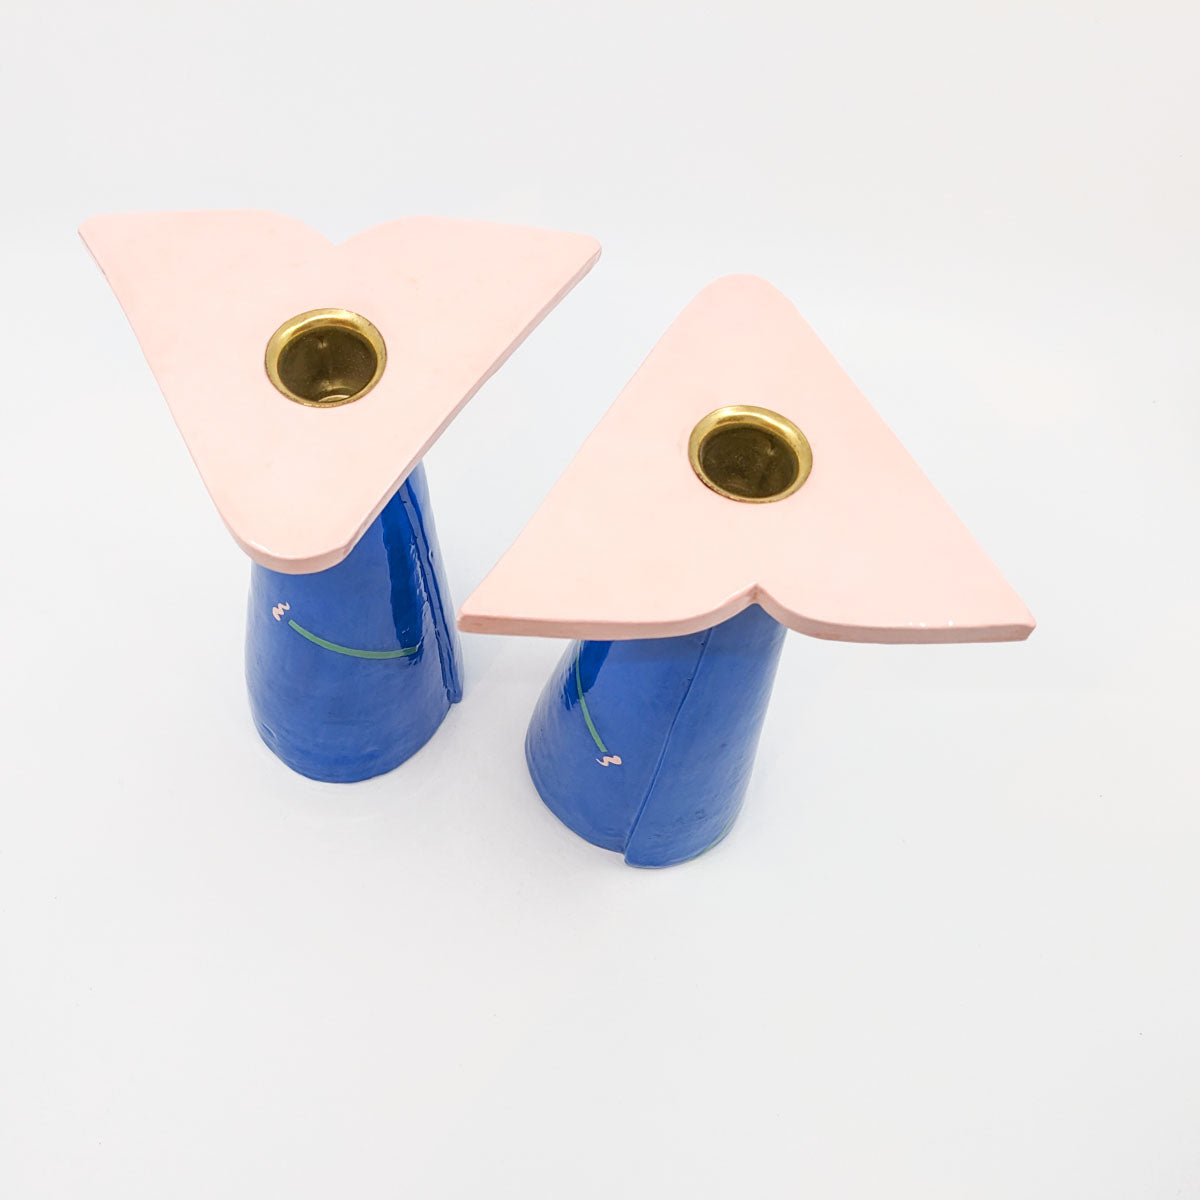 Candle Stick Holders in Dark Blue